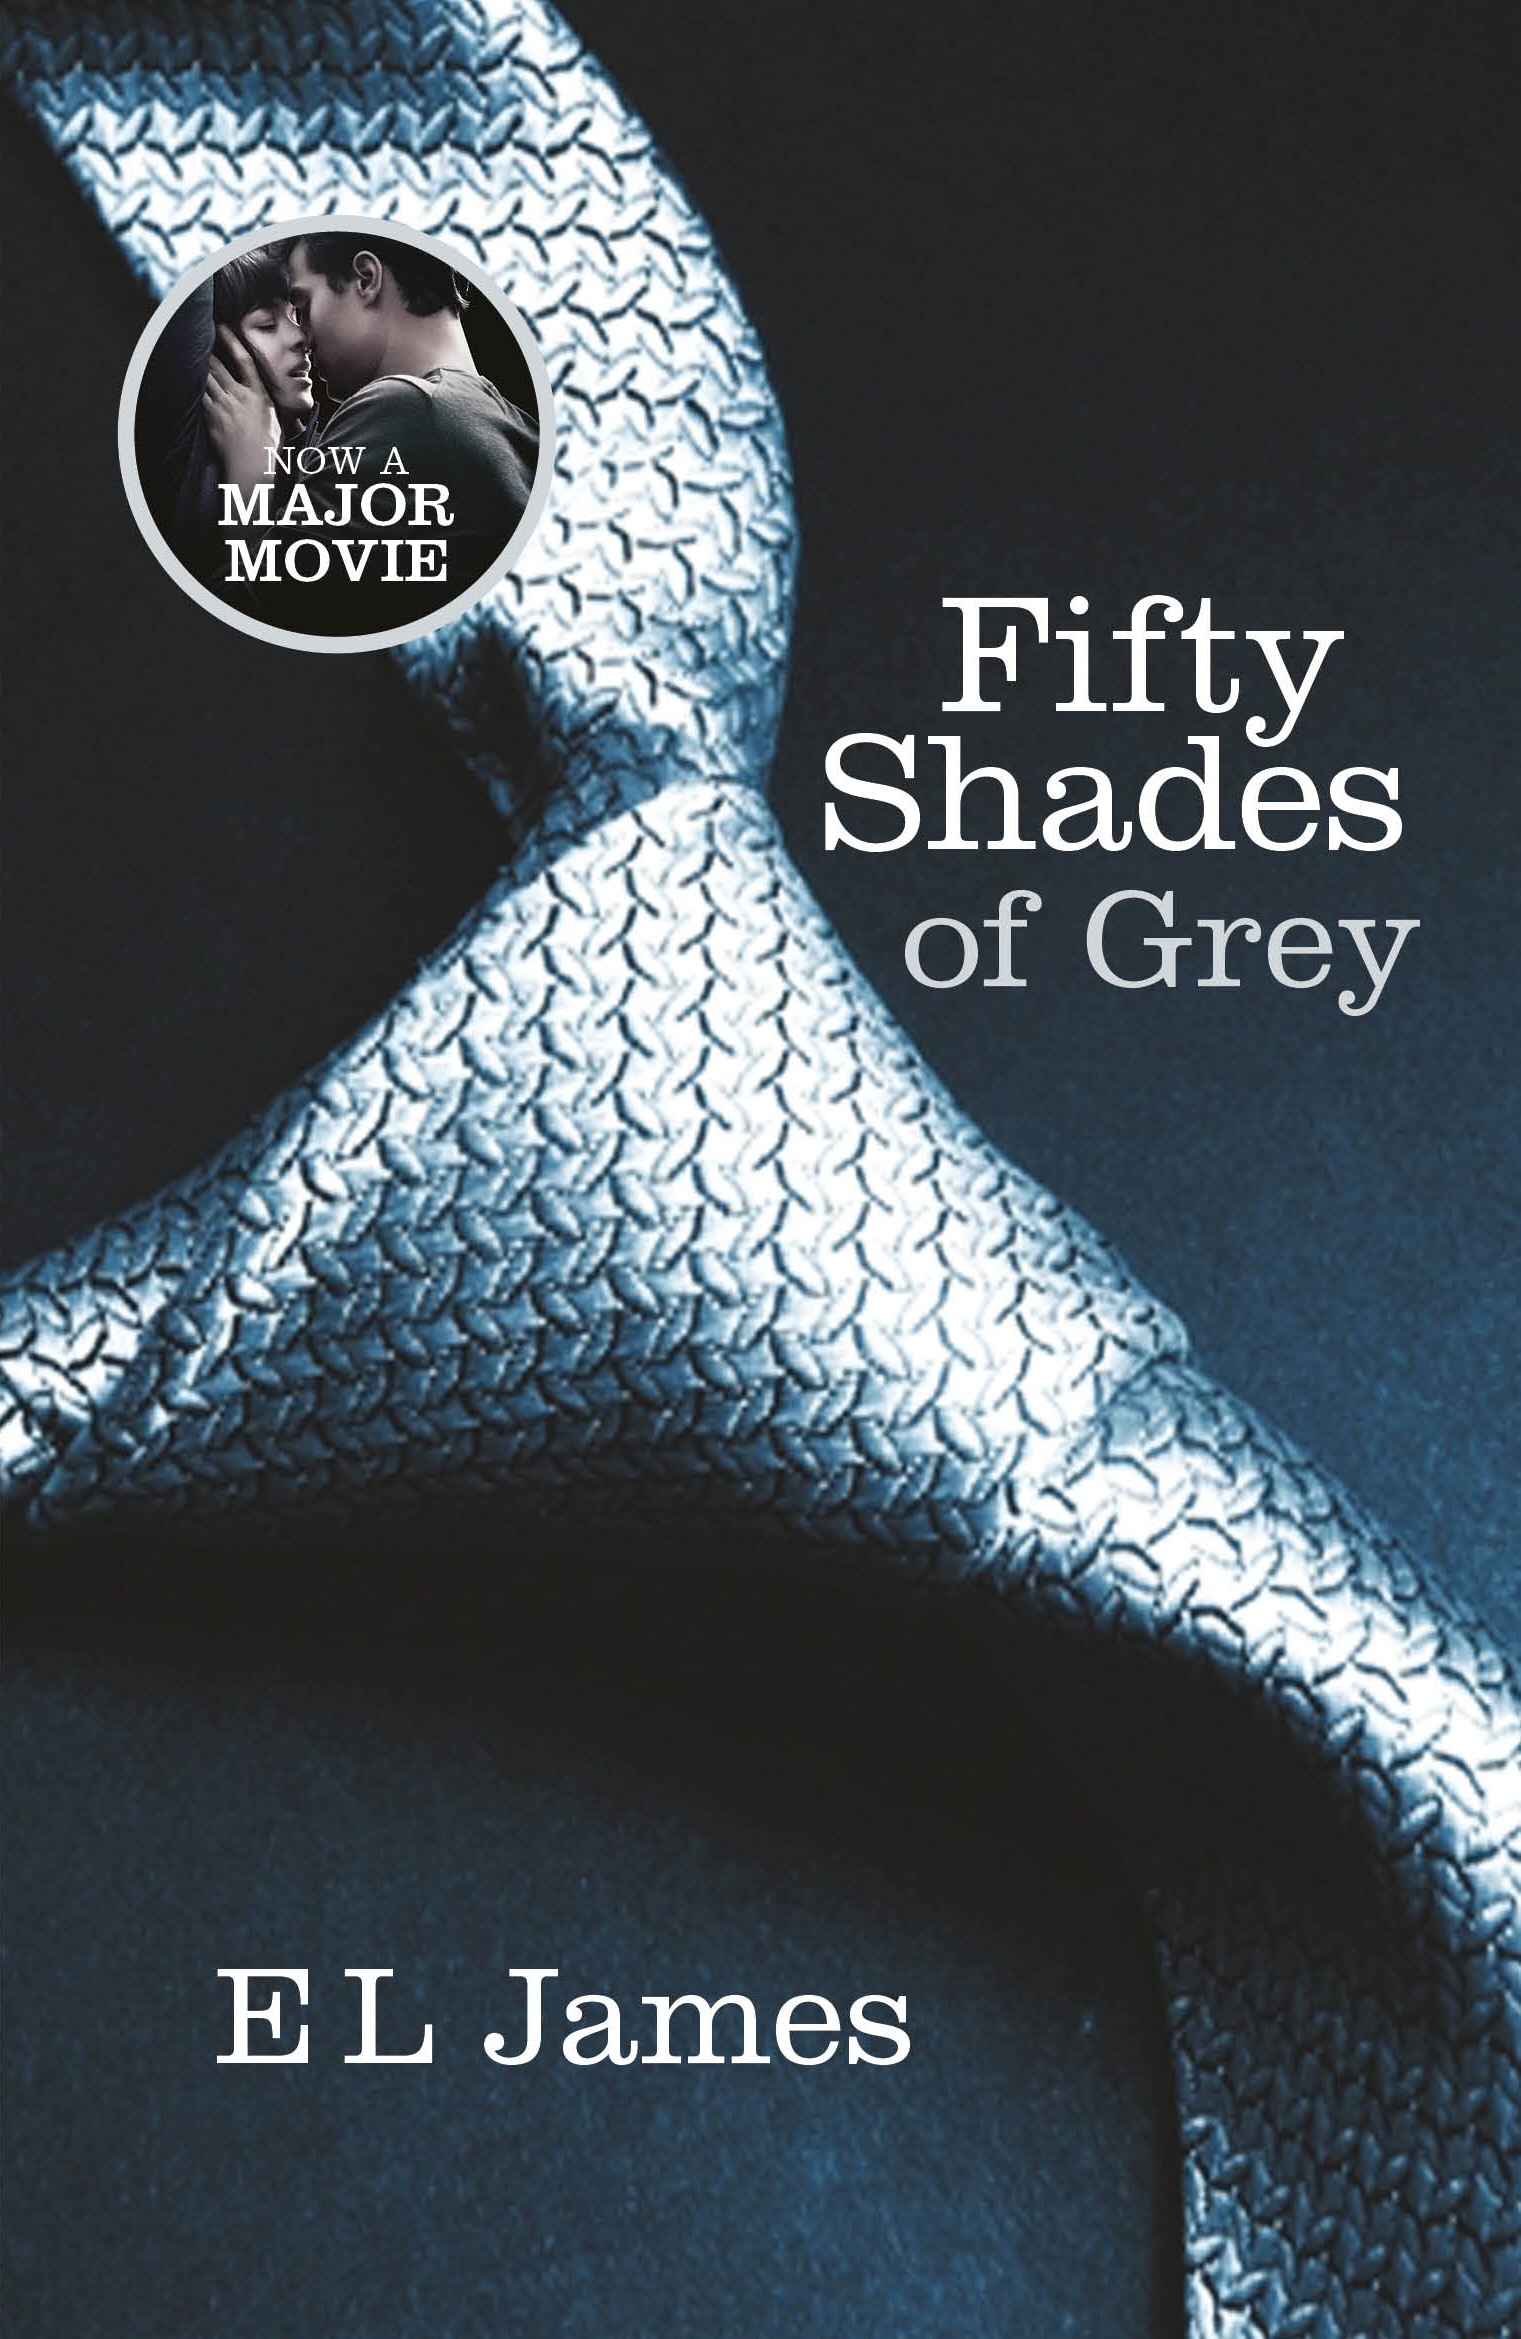 Book “Fifty Shades of Grey” by E L James — April 12, 2012